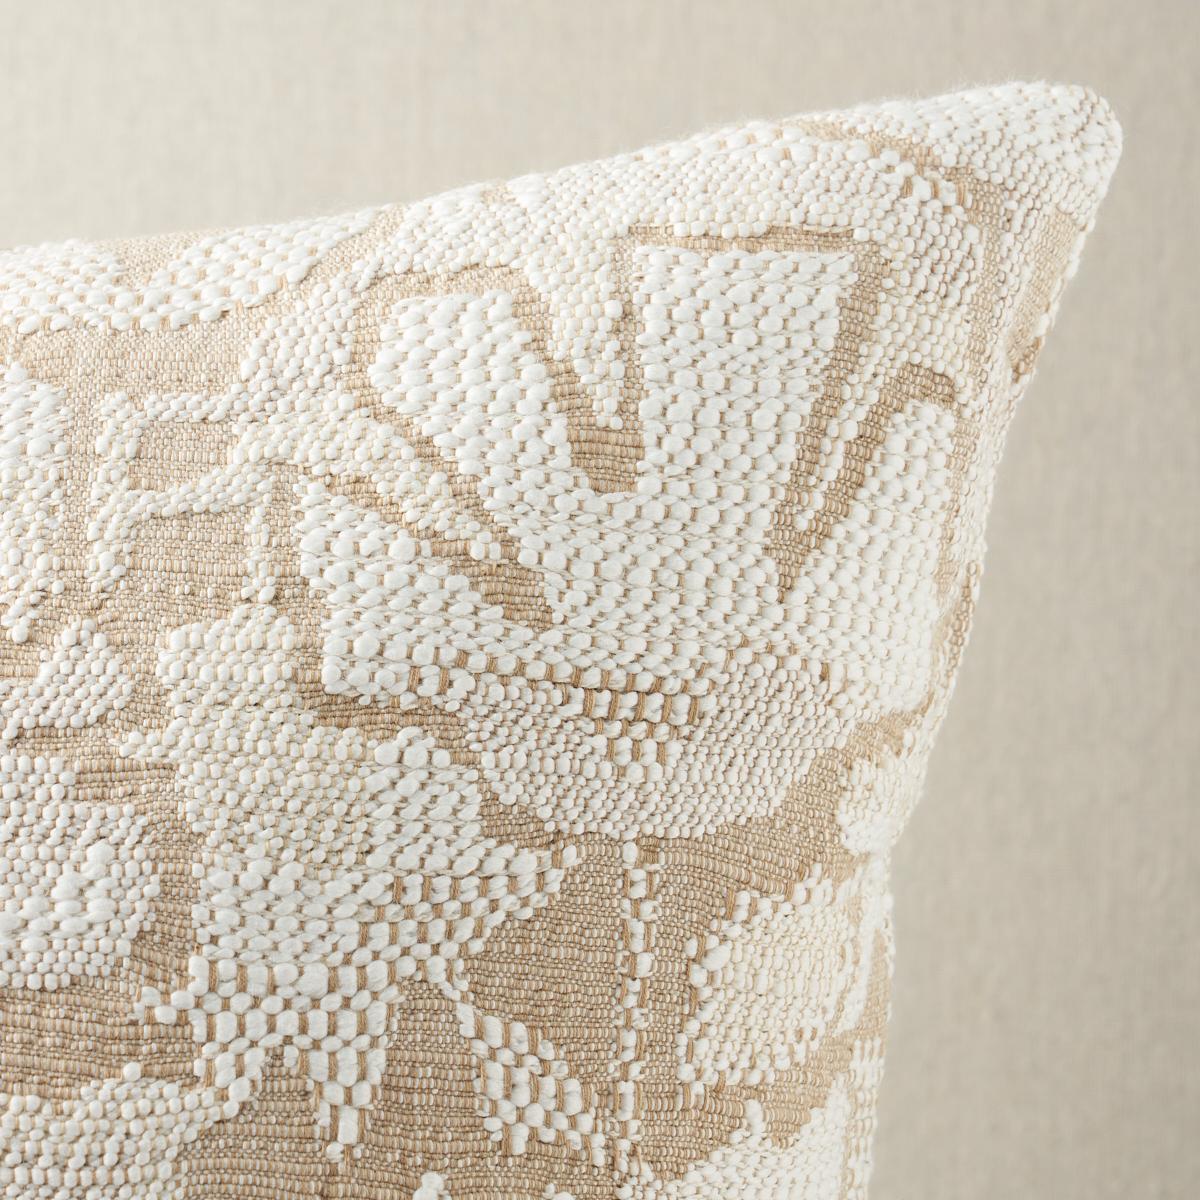 This pillow features Wild Flower with a knife edge finish. Slubby irregular yarns give Wild Flower fabric its wonderful handwoven look and extraordinary texture. Pillow includes a feather/down fill insert and hidden zipper closure.
